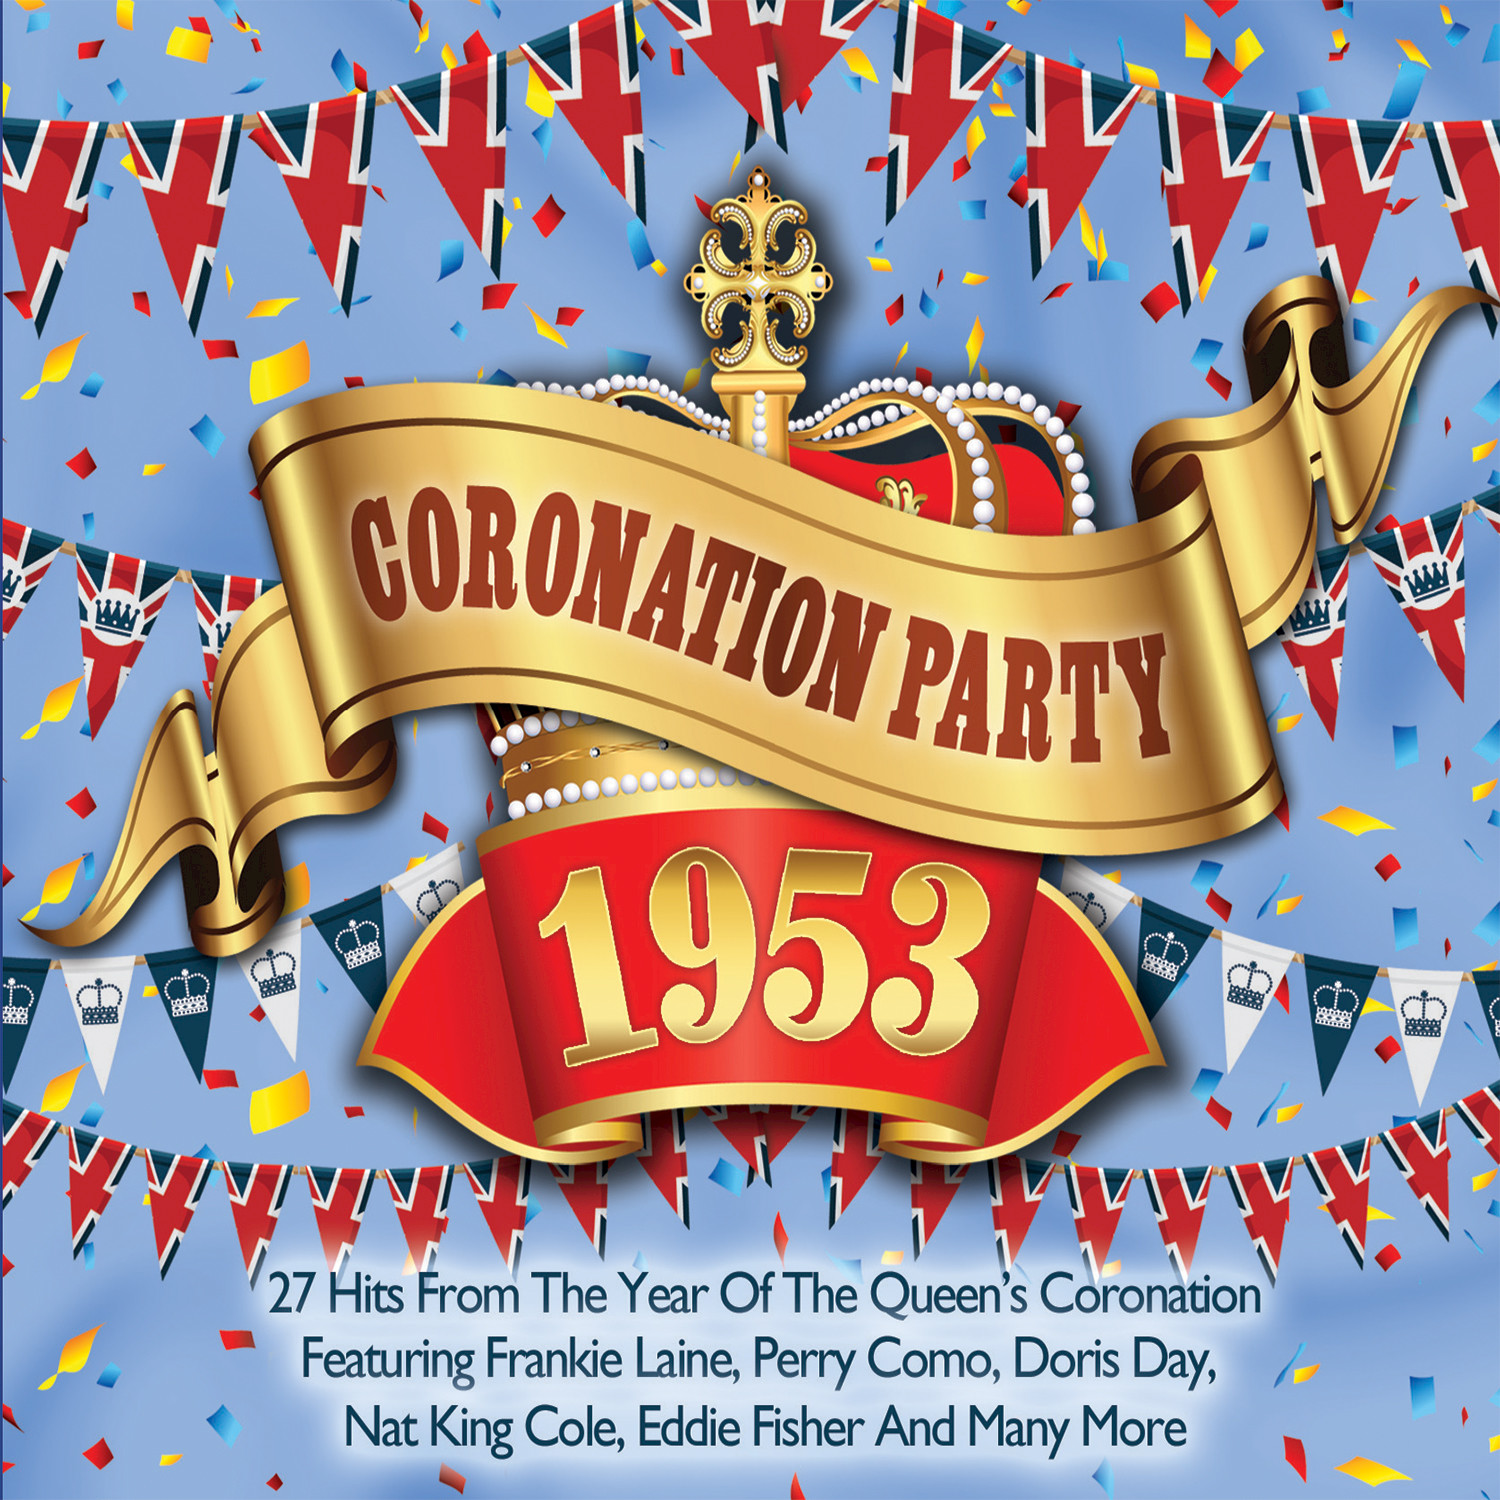 The Hits of 1953  Coronation Party